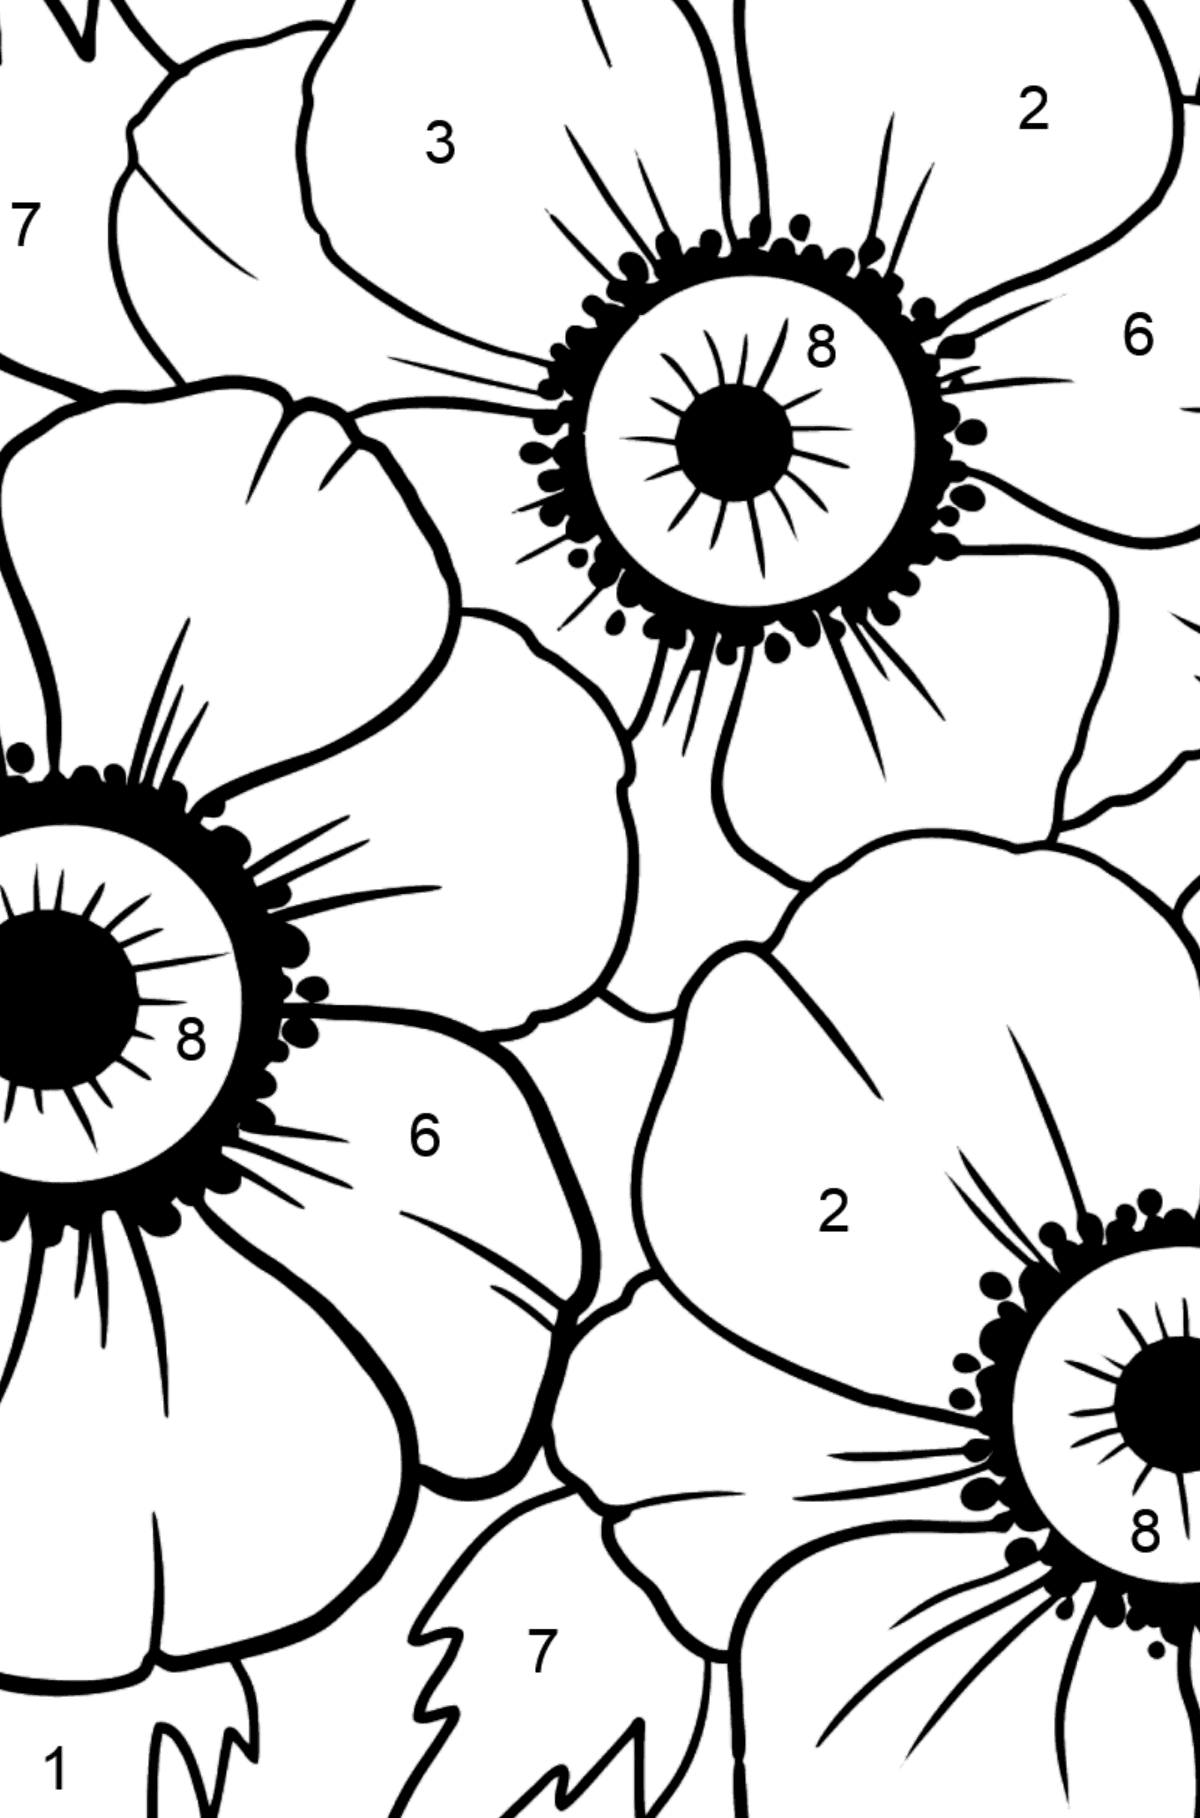 Flower Coloring Page - A Yellow and Orange Anemone Coronaria - Coloring by Numbers for Kids